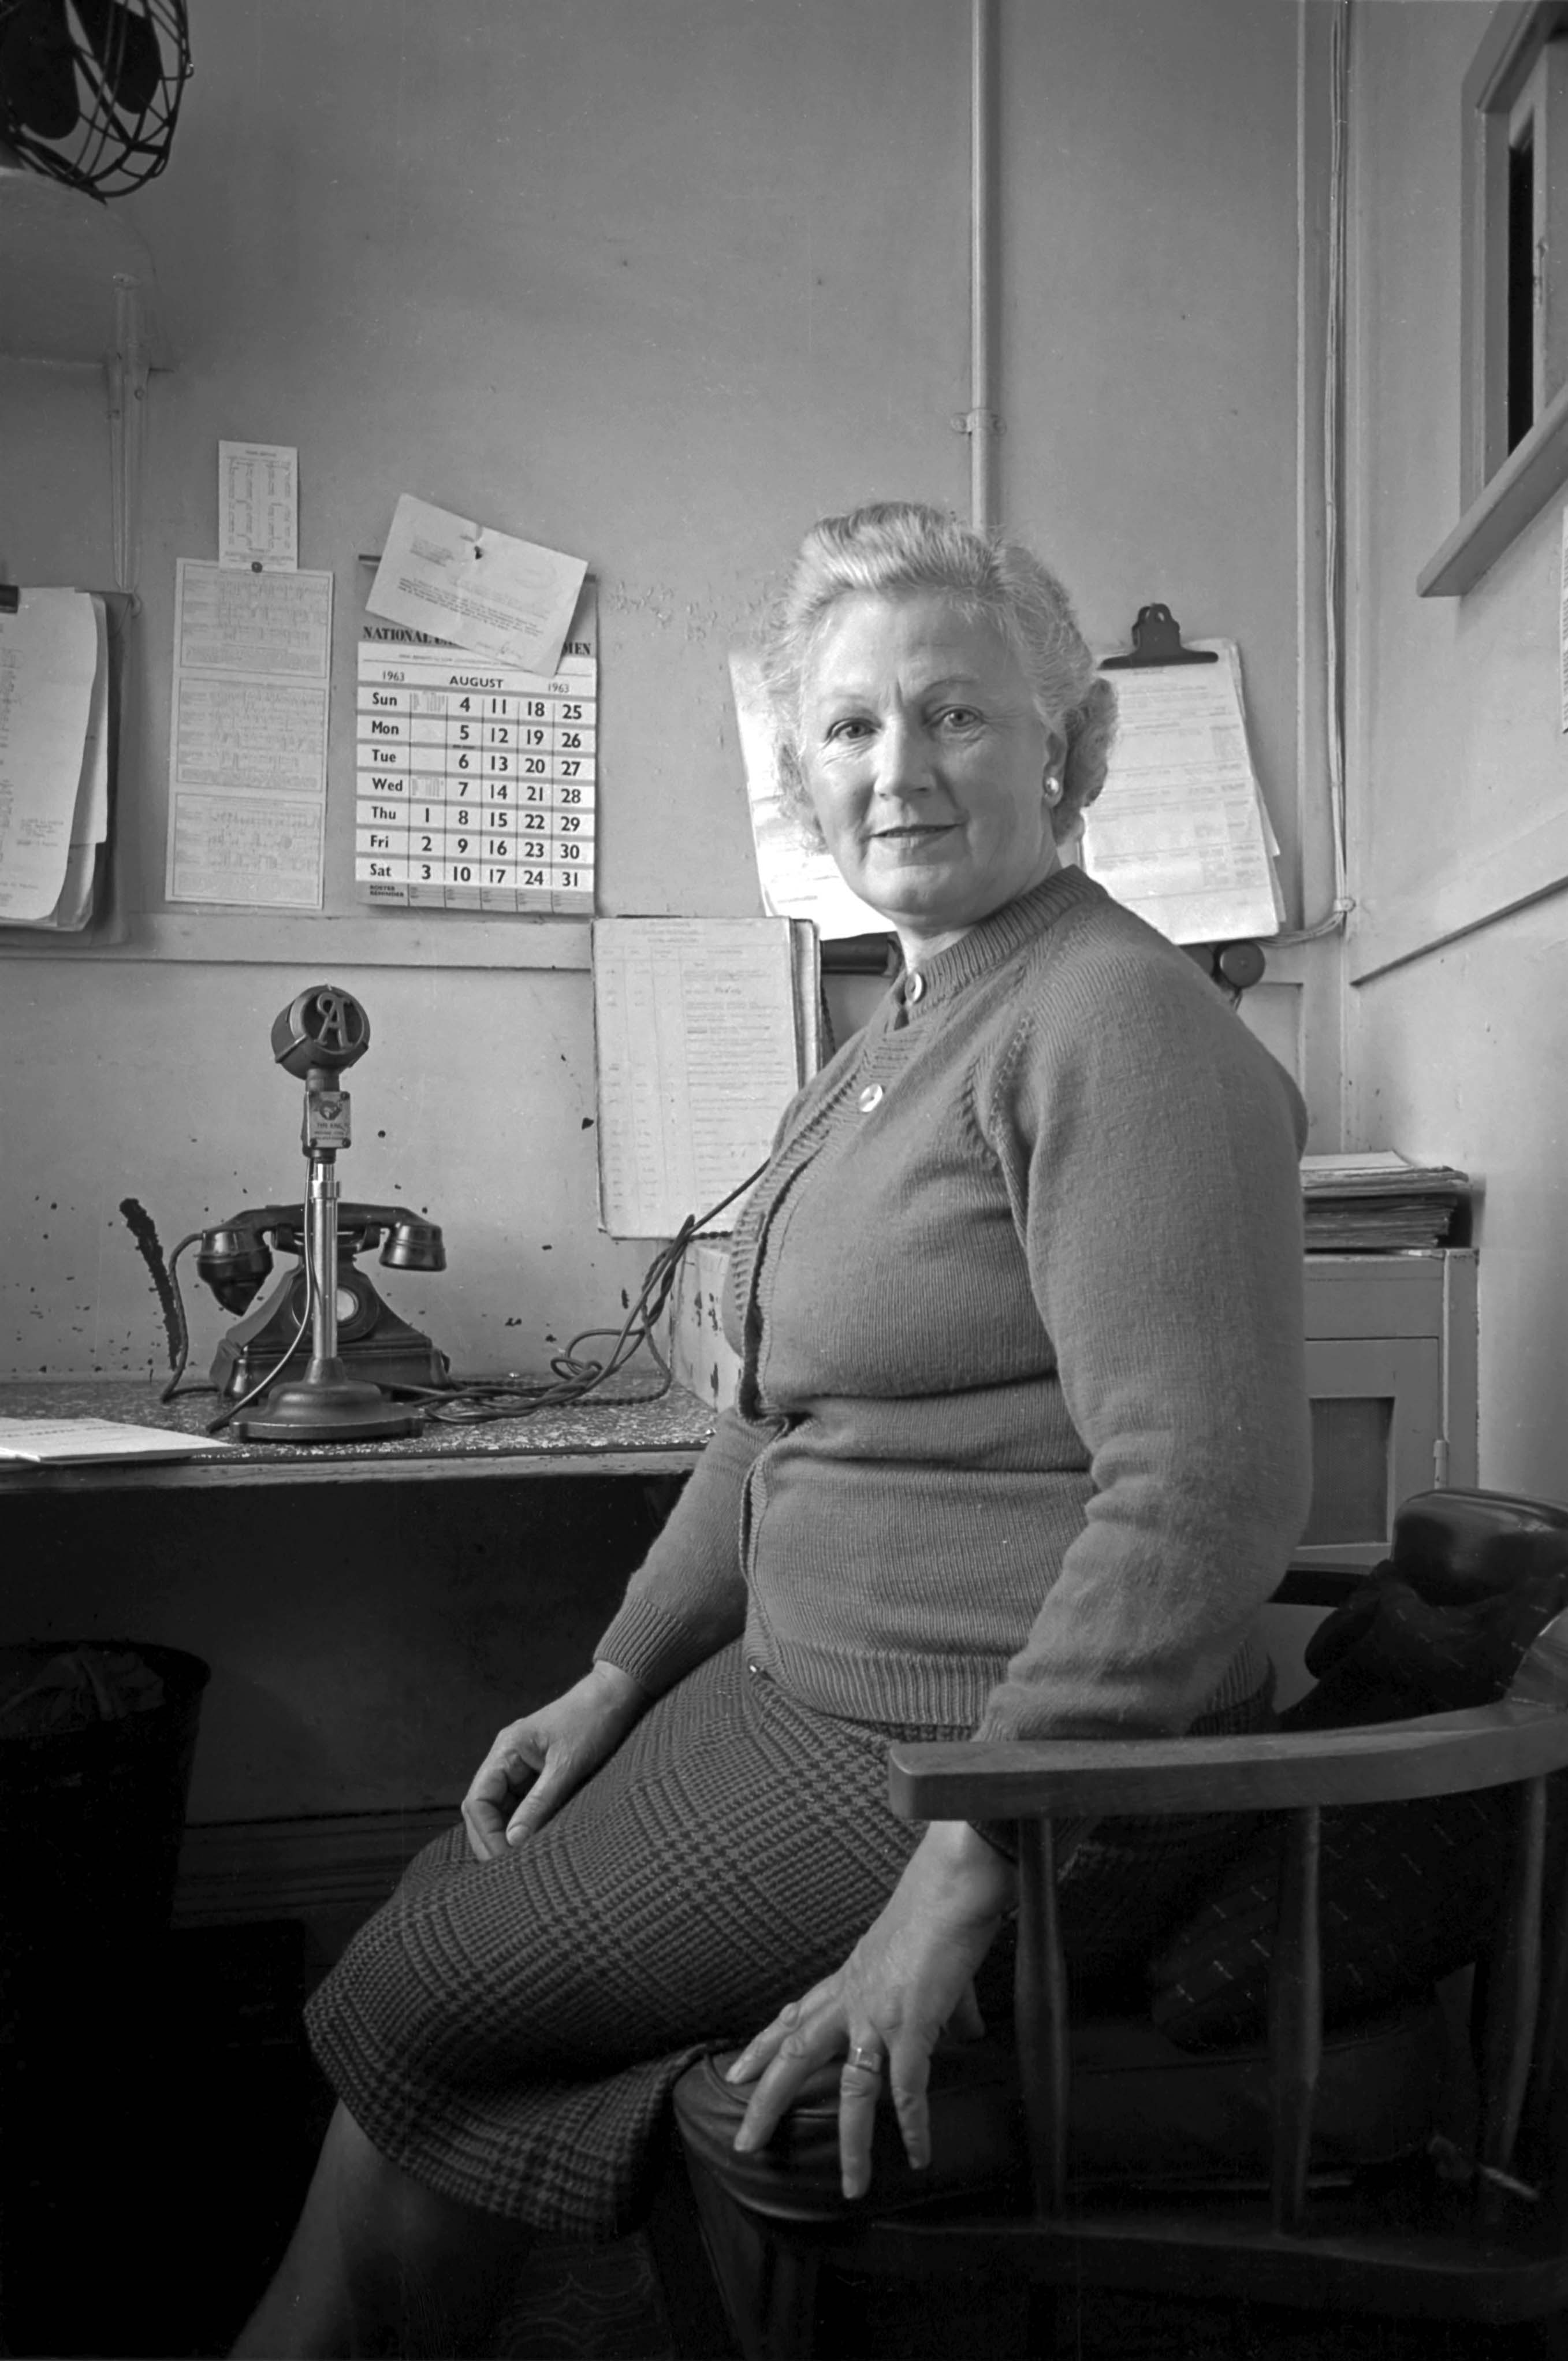 Station Announcer Dorothy Ross on 22nd August 1963. Station announcers are ‘heard but not seen’. At Grantham they were confined in a this tiny room. The Railway Review / National Union of Railwaymen calendar is a reminder of the importance to railway staff of their trades unions. Photograph by Cedric A. Clayson, © John Clayson